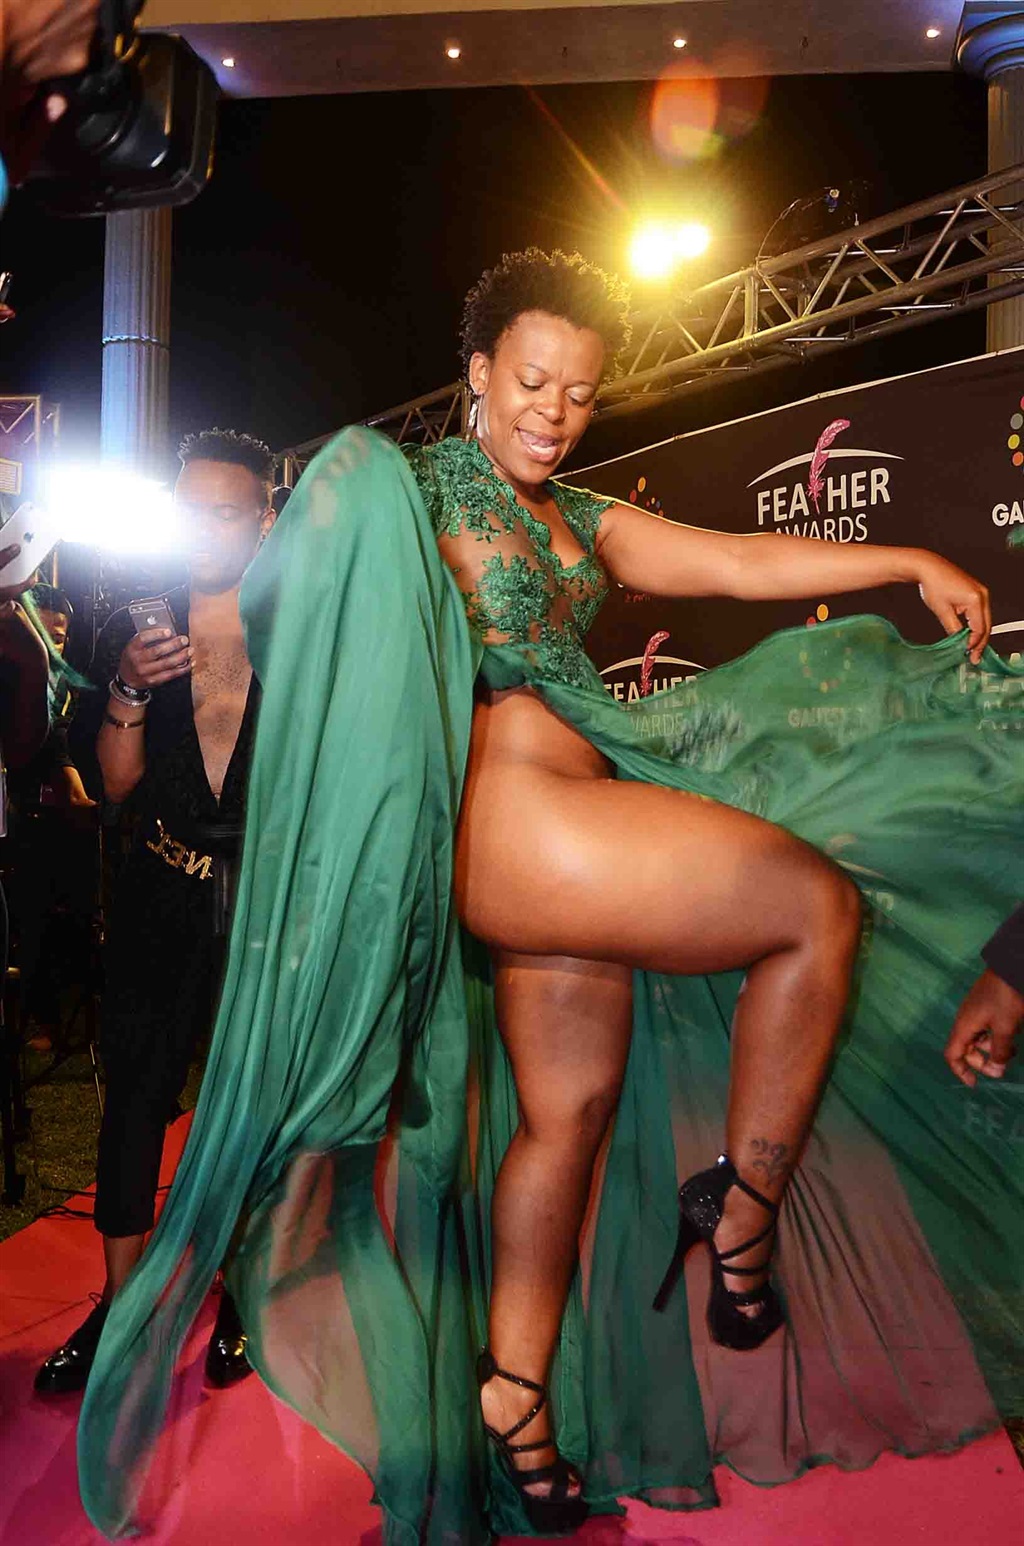 Out of hand': Fans react to Zodwa Wabantu without underwear